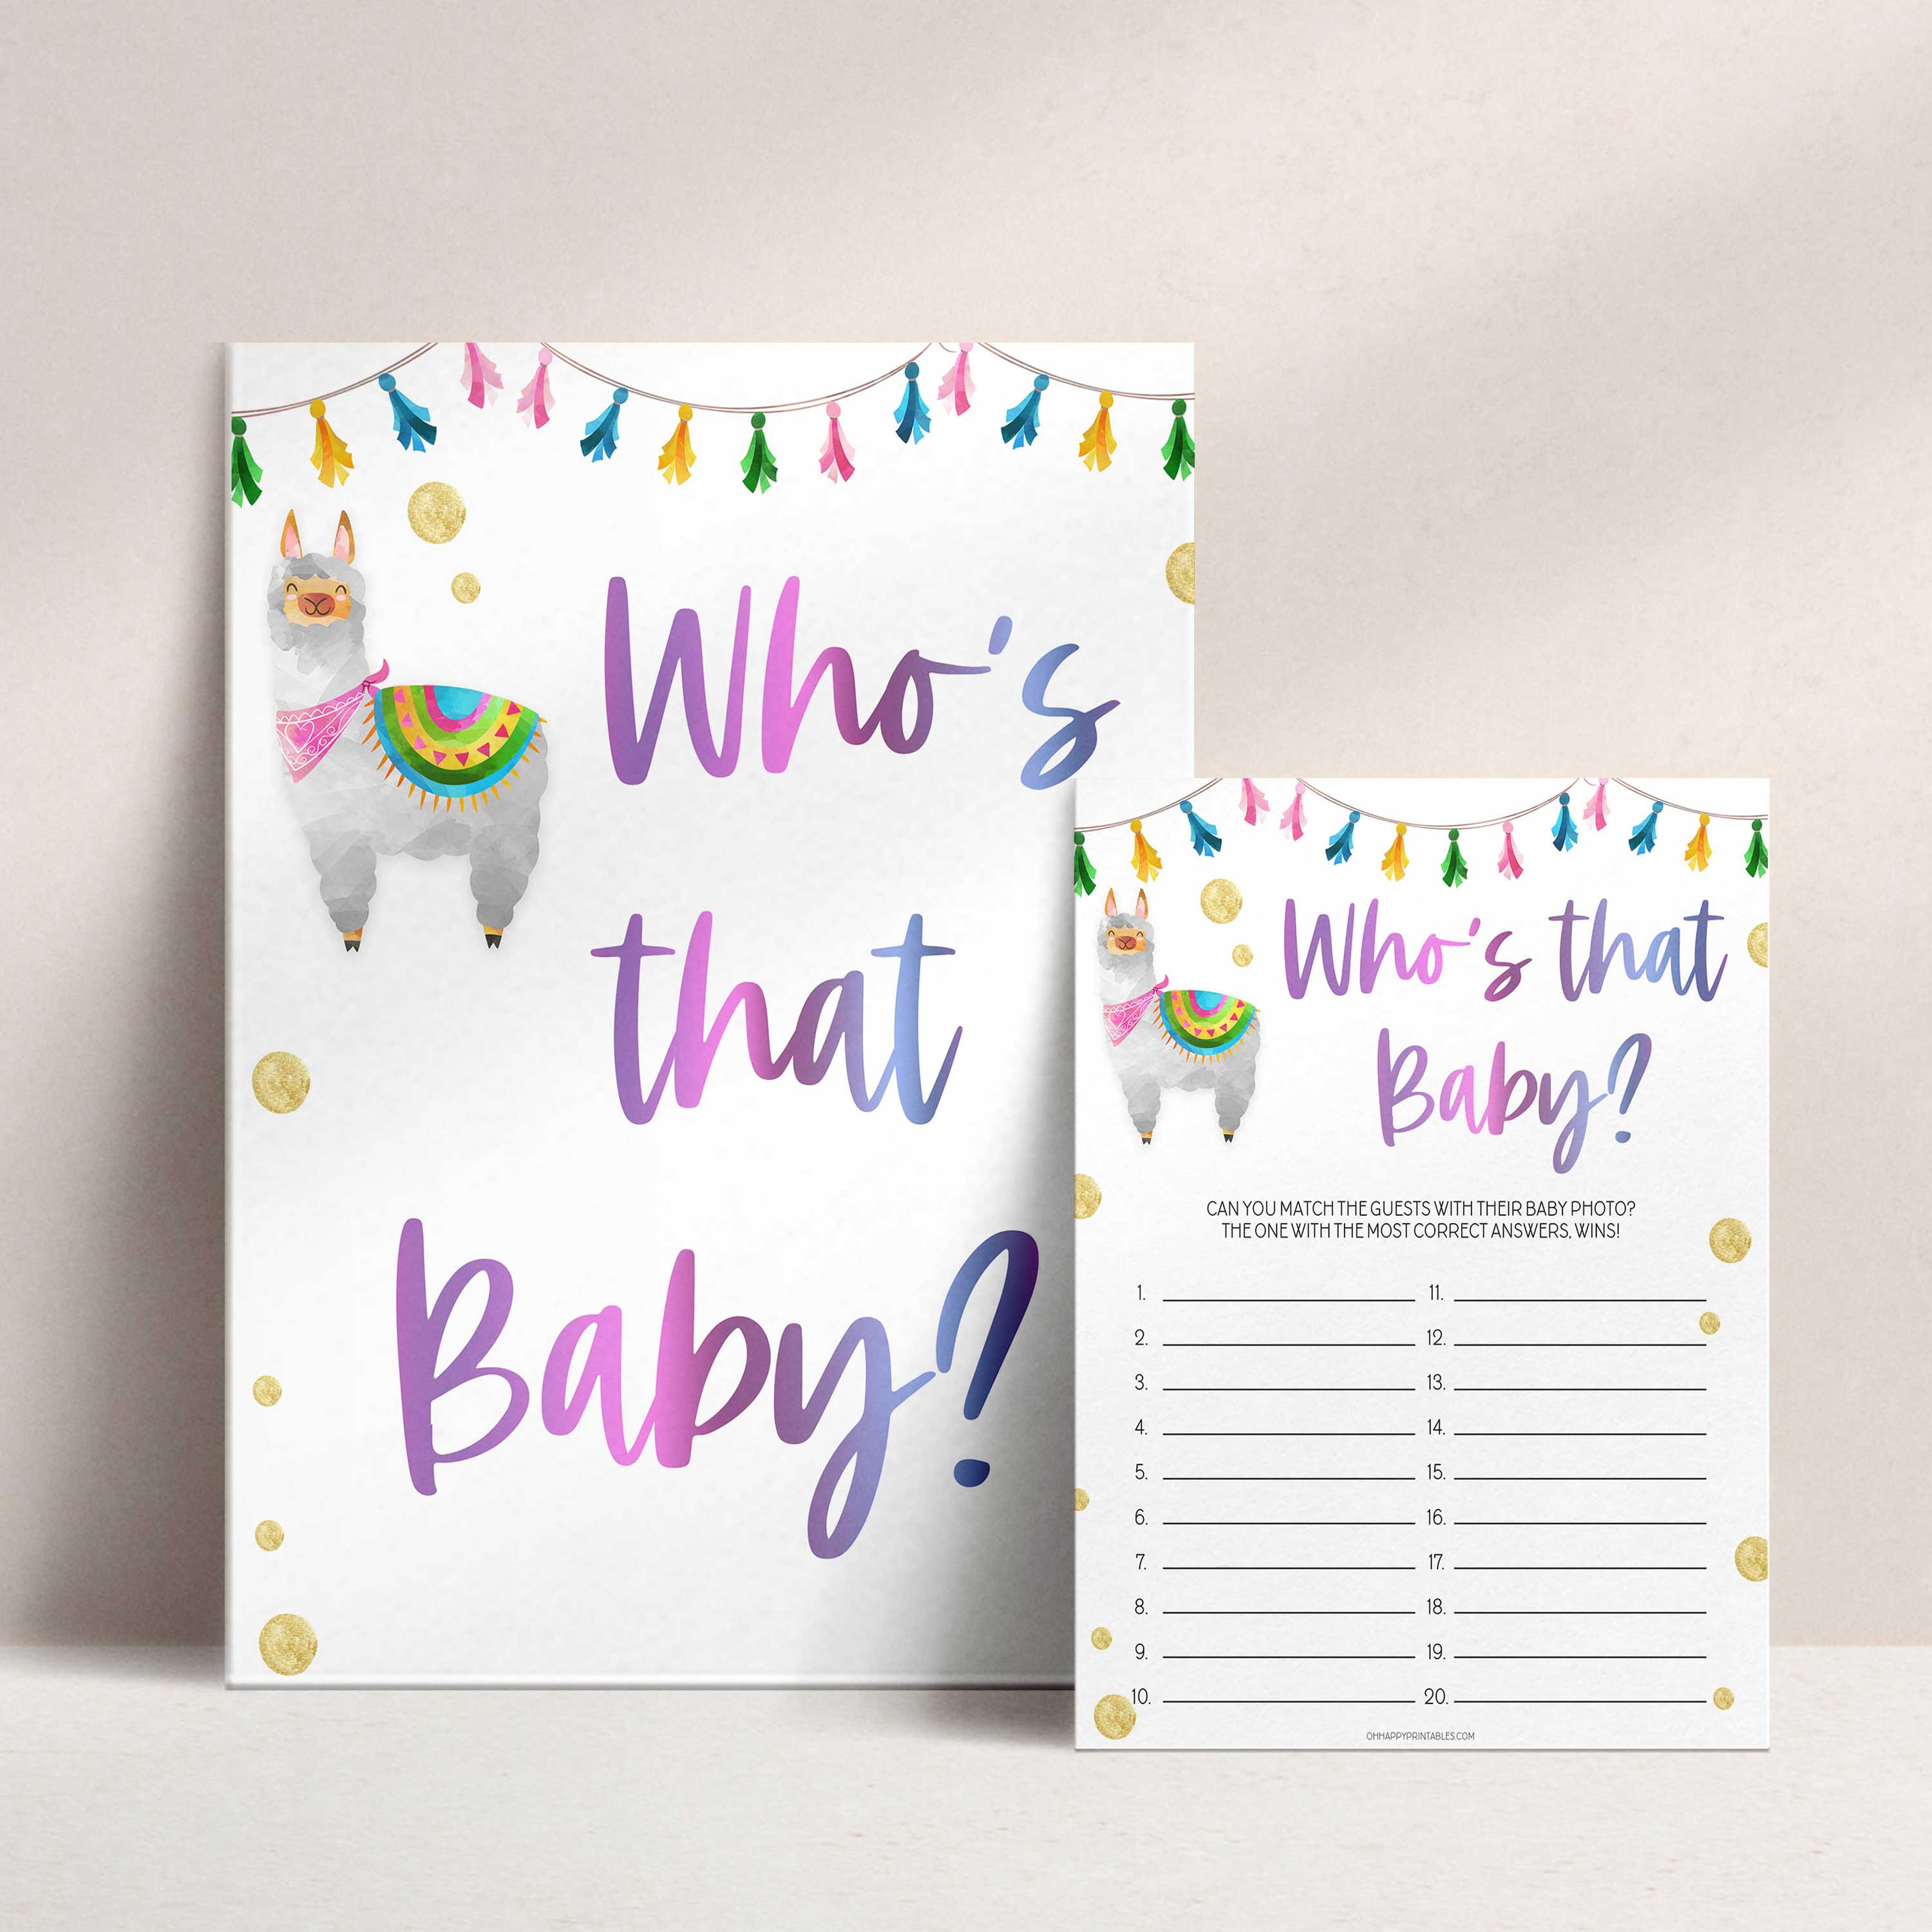 who's that baby game, guess the baby pictures game, Printable baby shower games, llama fiesta fun baby games, baby shower games, fun baby shower ideas, top baby shower ideas, Llama fiesta shower baby shower, fiesta baby shower ideas